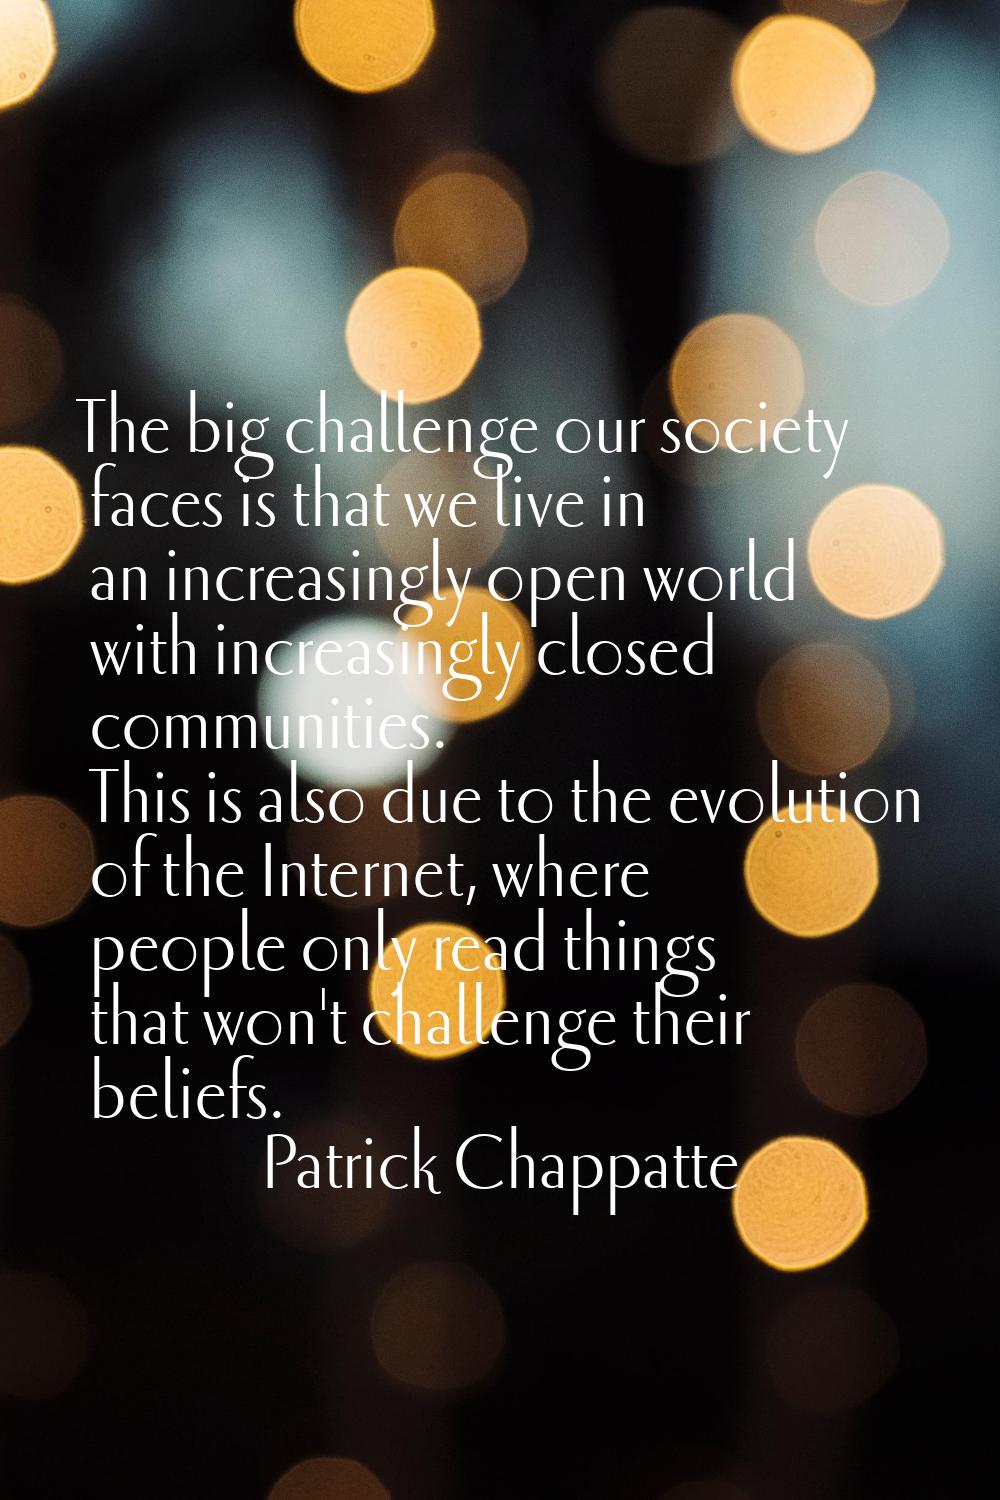 The big challenge our society faces is that we live in an increasingly open world with increasingly